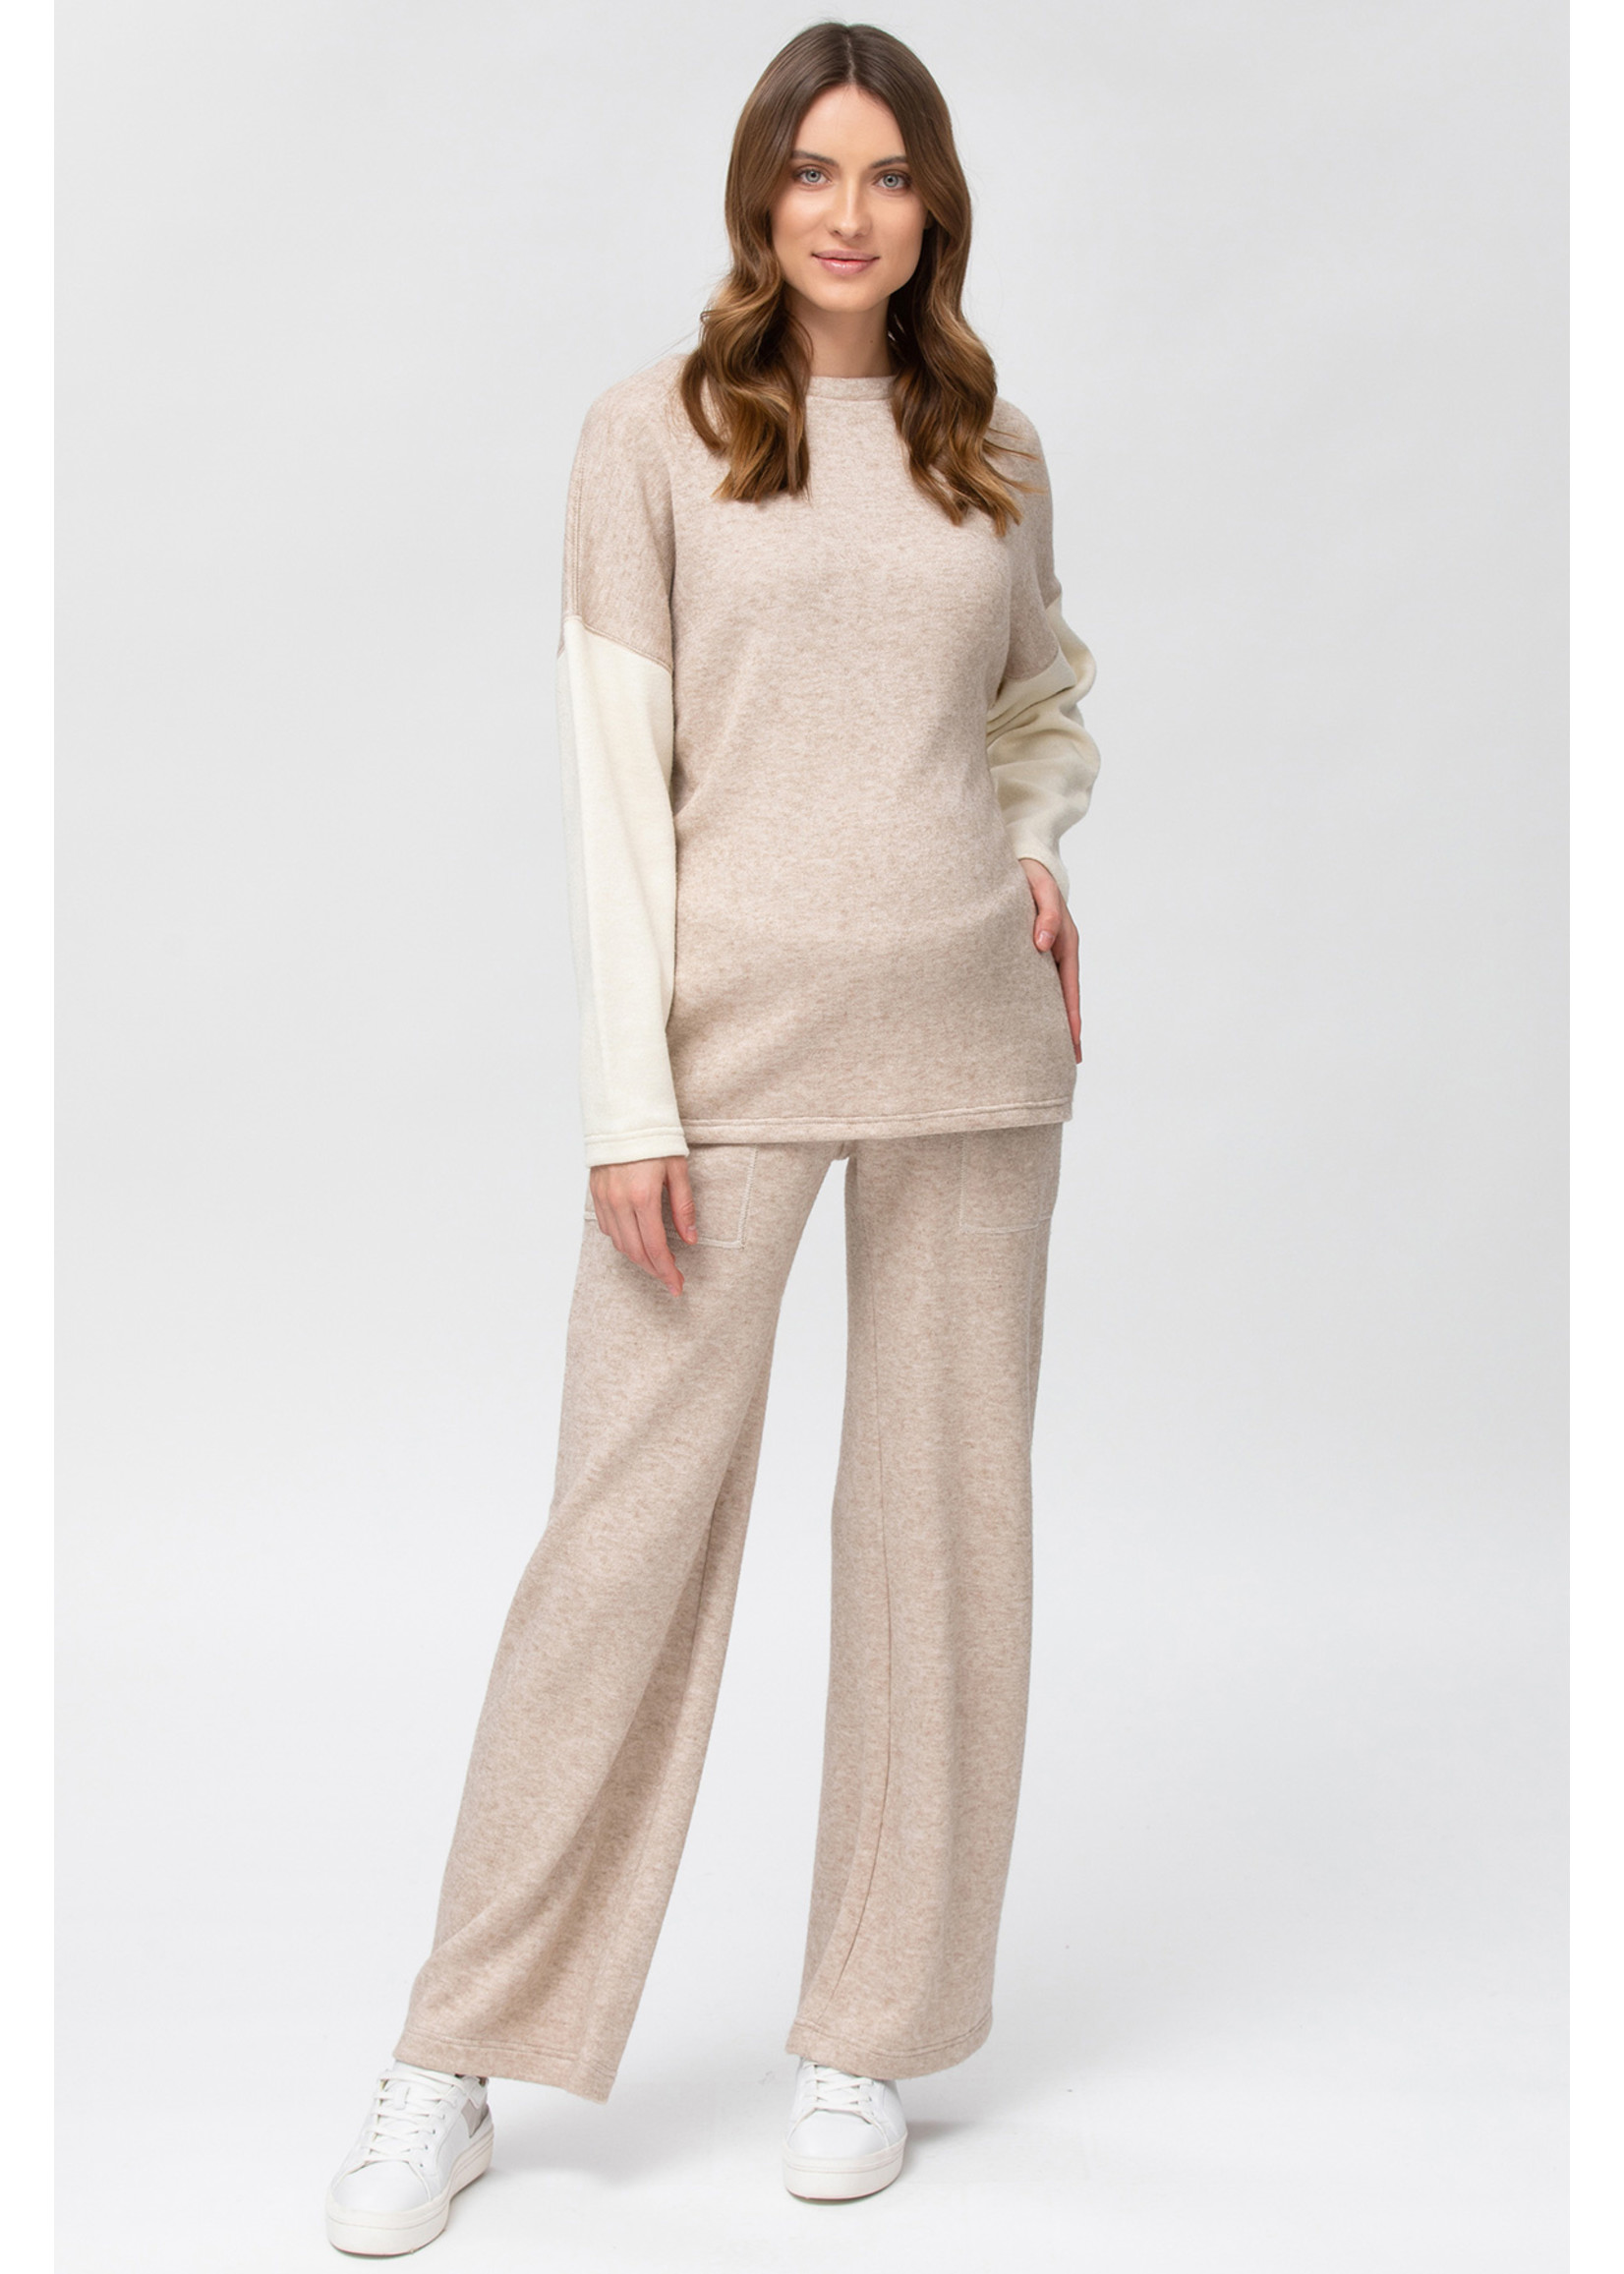 PIETRO BRUNELLI TROUSERS THE COZY PANTS OATMEAL  HEATHER